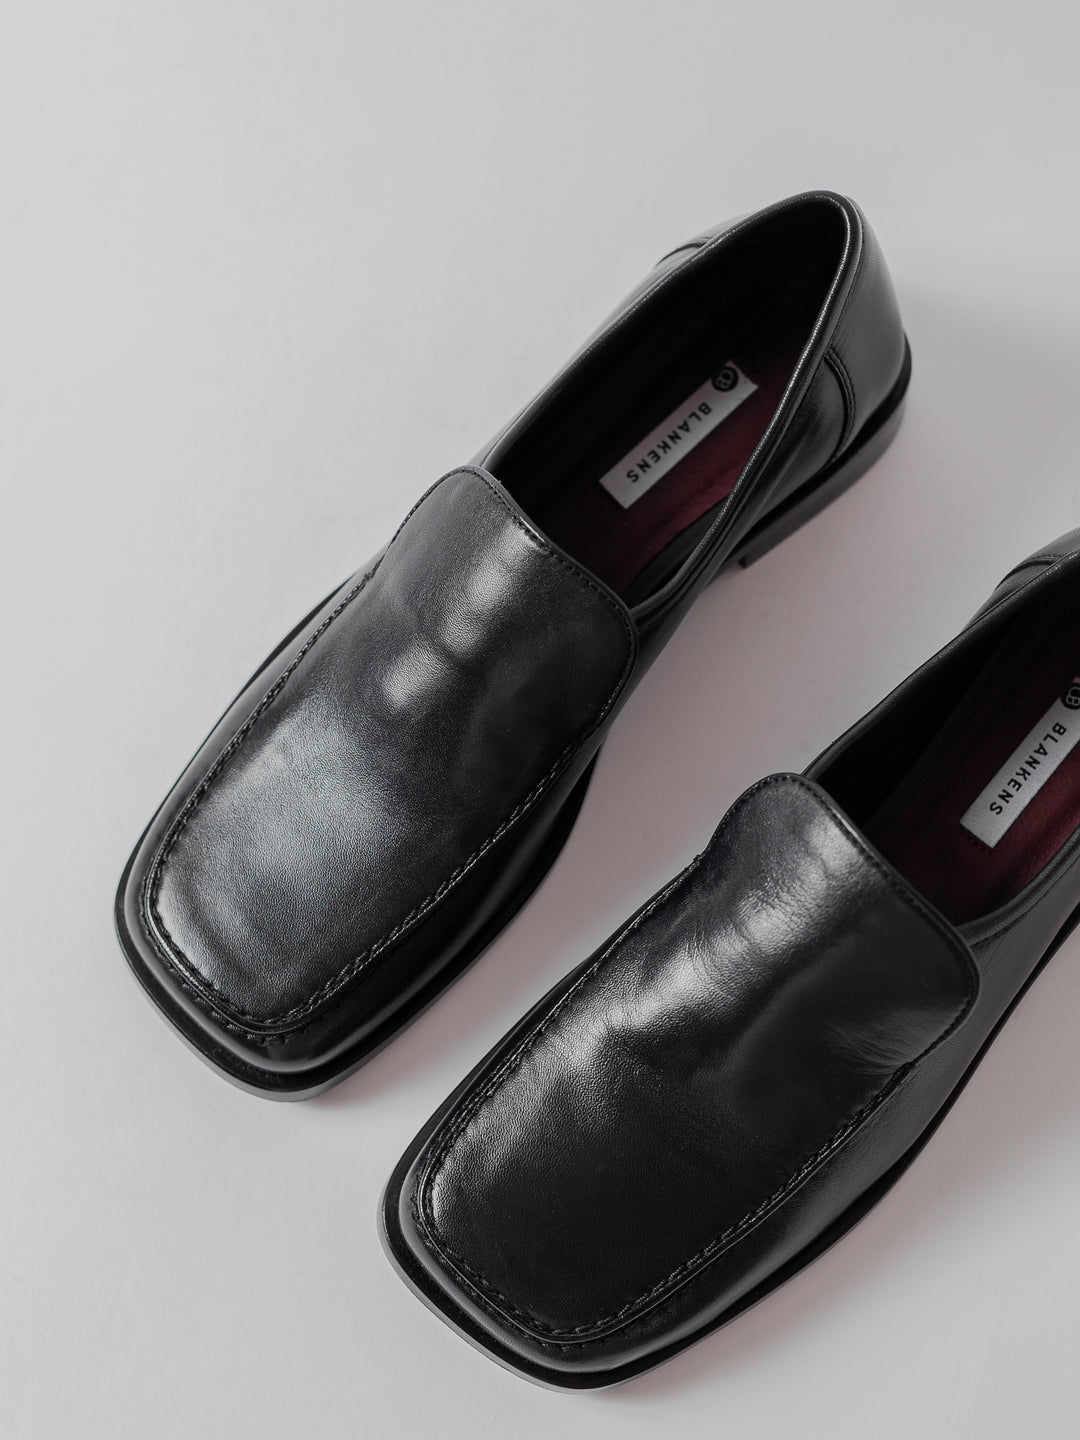 Blankens The Ritz square shape loafer black leather